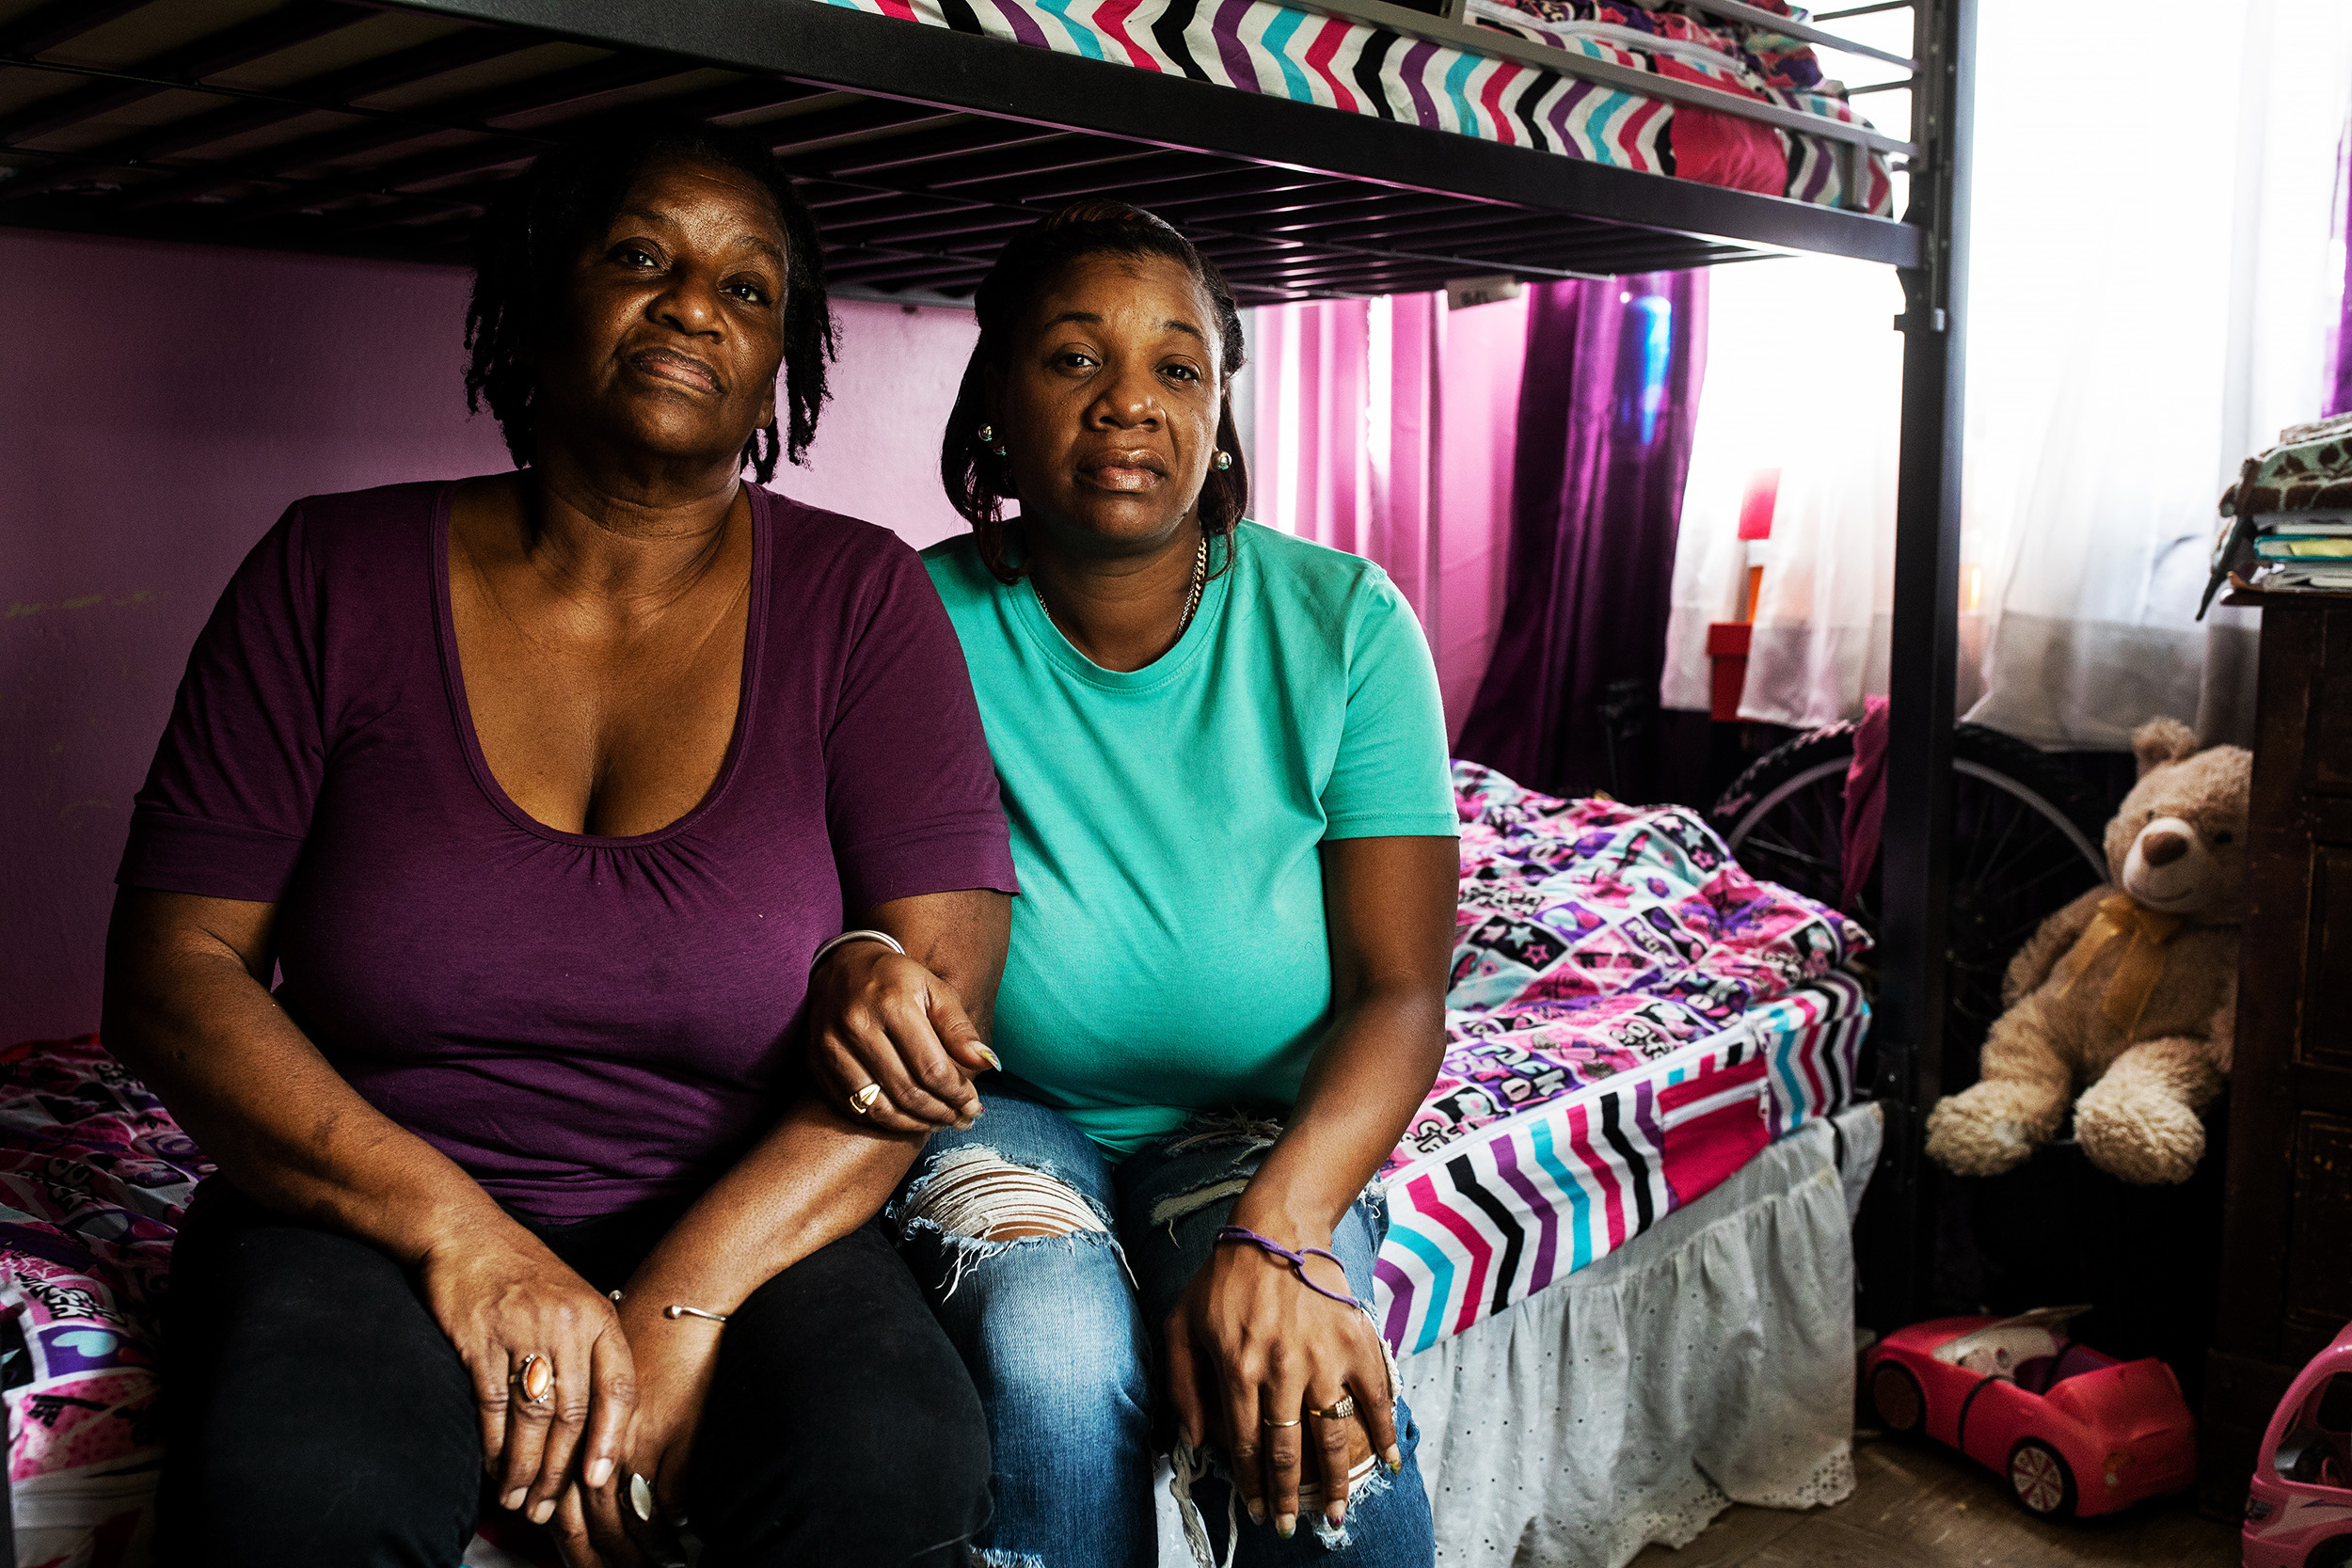  Jamila Cox, right, and Robin Parks at their apartment in Astoria Queens, New York. Jamila is a foster mother who took in a little girl and baby boy who lived next door after the children mother was killed in January 2017. 